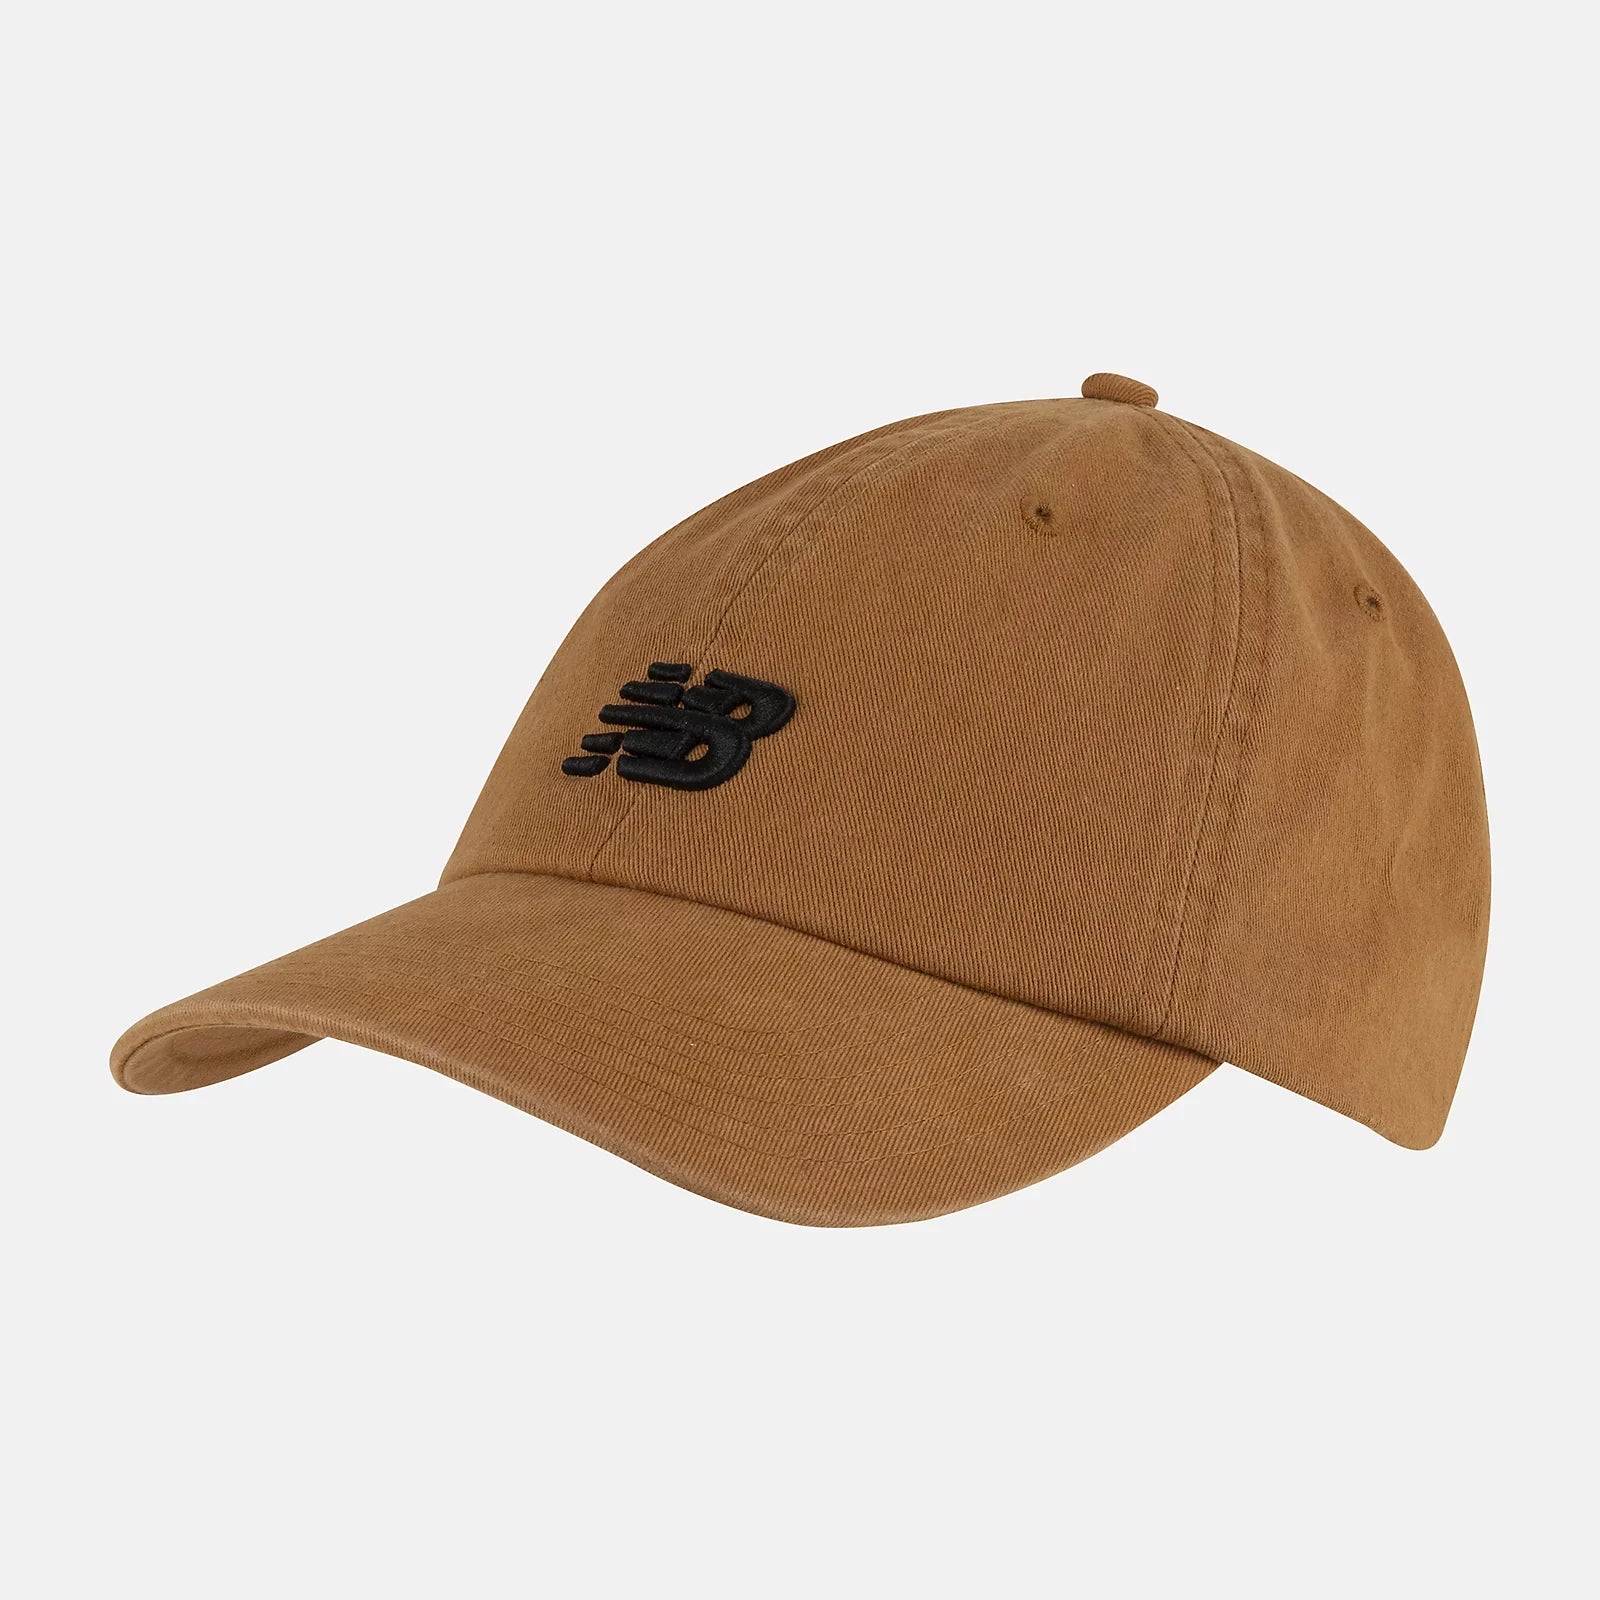 NEW BALANCE 6-Panel Curved Brim NB Classic Hat in Tobacco LAH91014 O/S TOBACCO FROM EIGHTYWINGOLD - OFFICIAL BRAND PARTNER